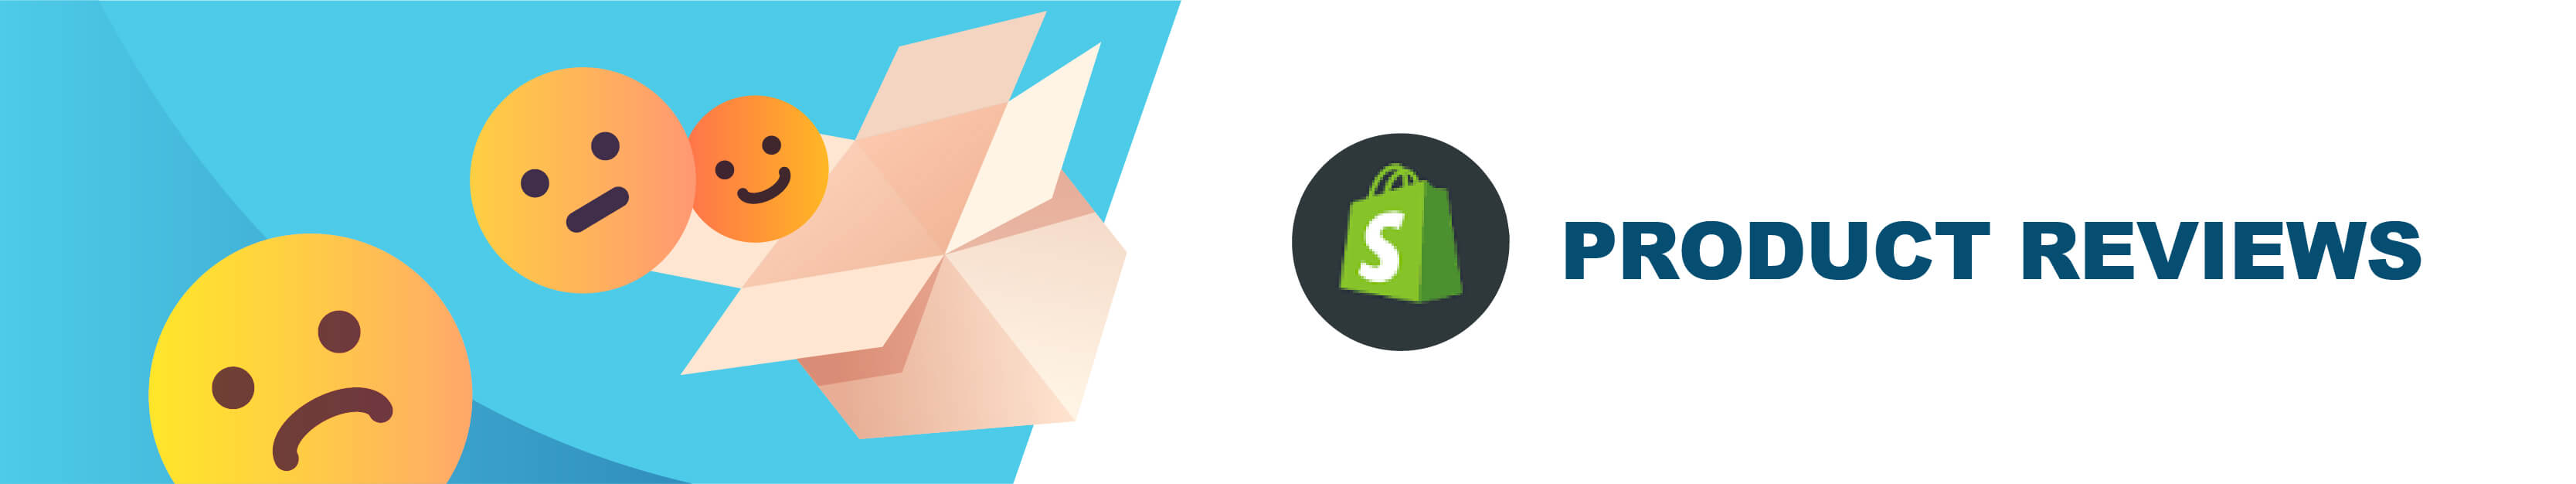 Product reviews shopify app